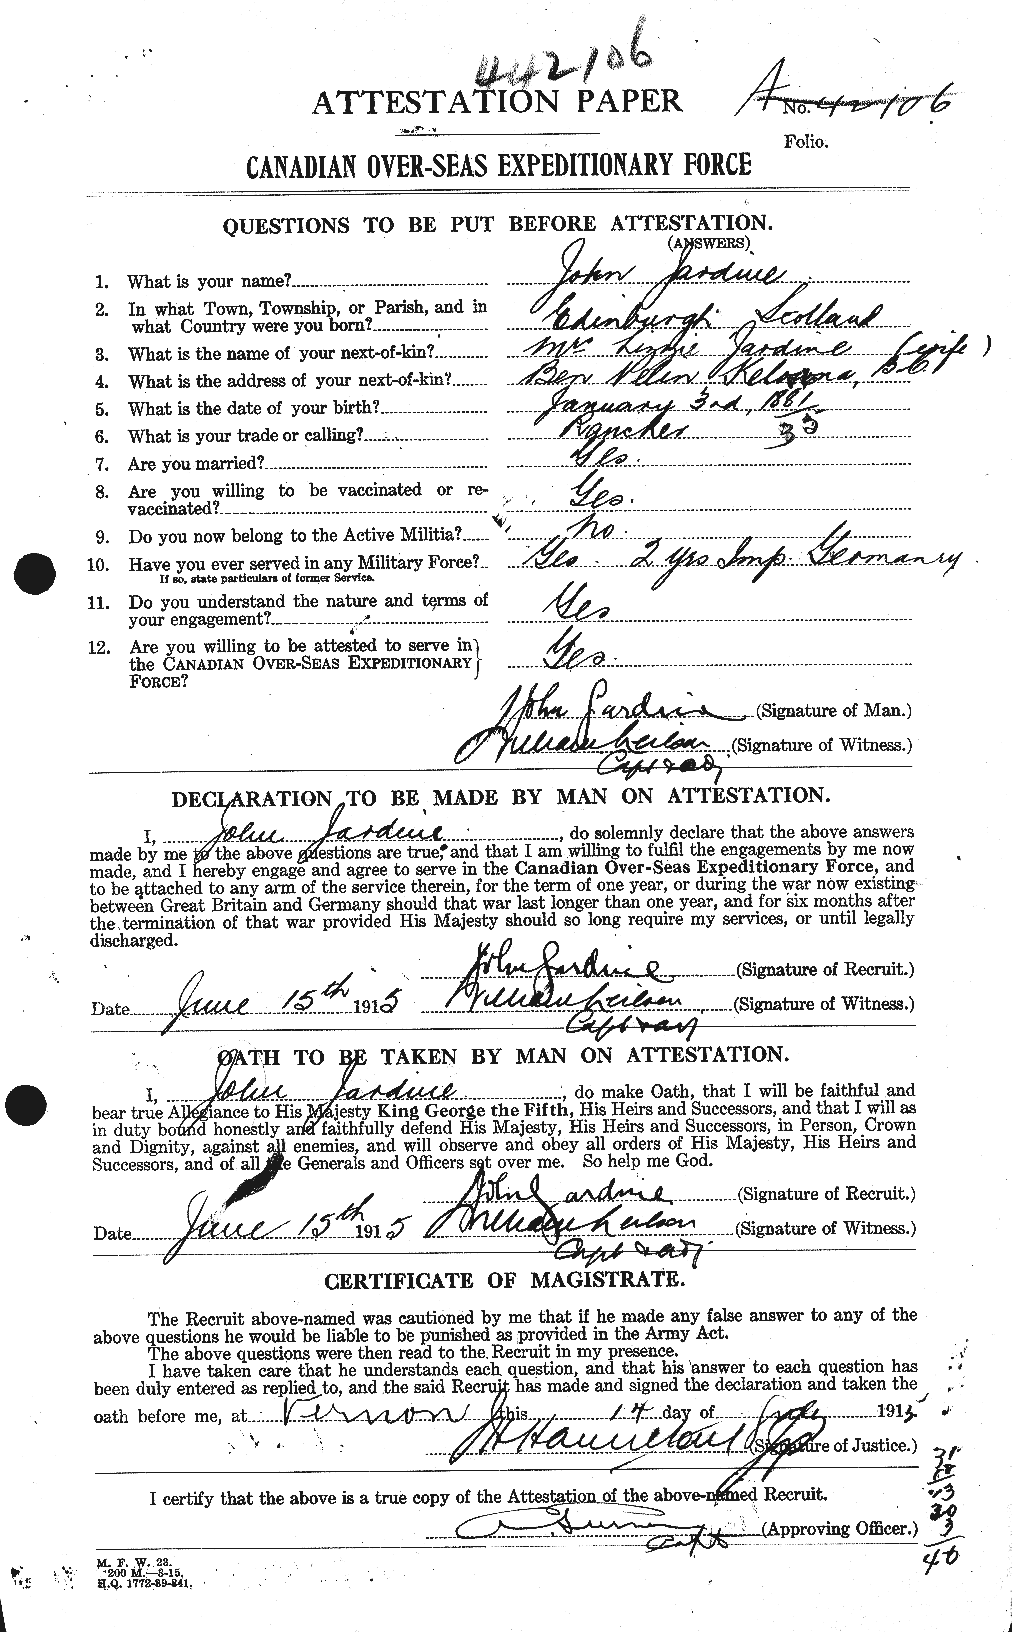 Personnel Records of the First World War - CEF 416403a